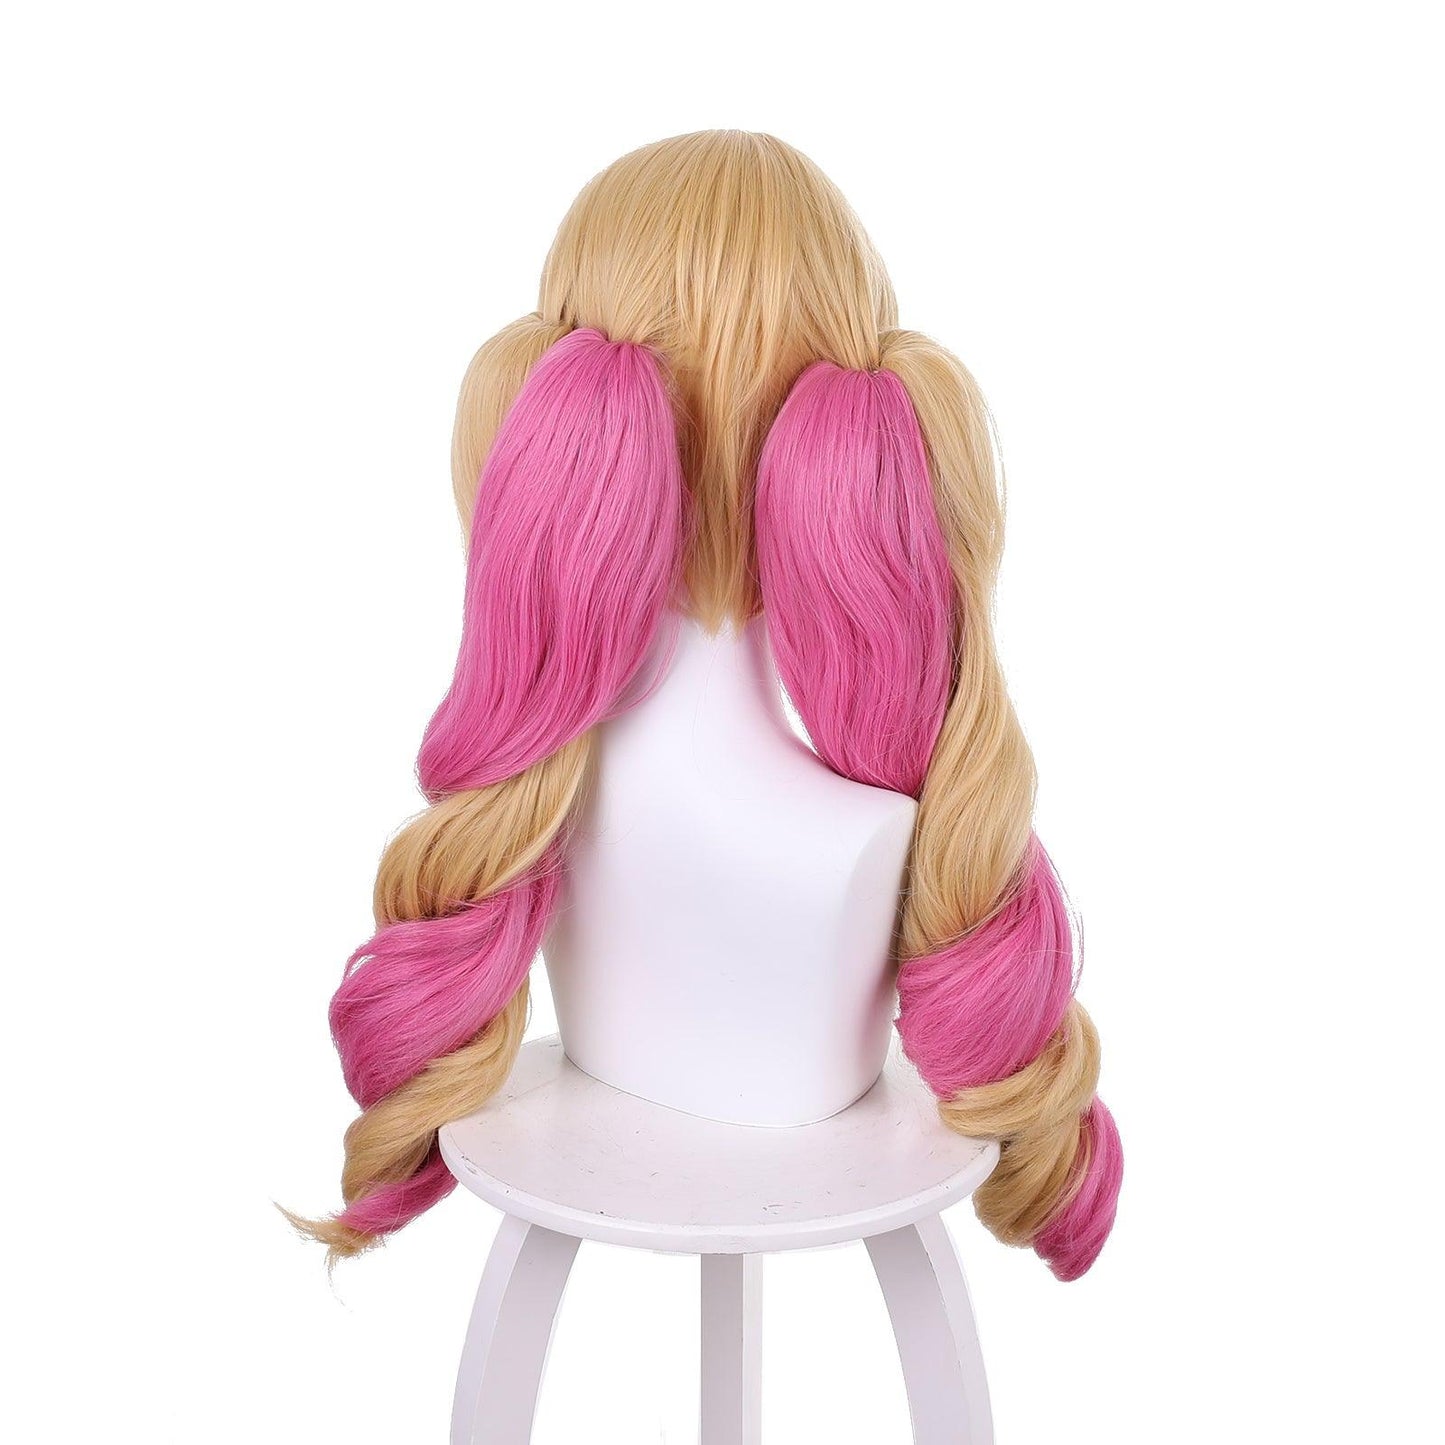 coscrew Anime Gwen Yellow peach pink Cosplay Wig of League of Legends/LOL 530D - coscrew